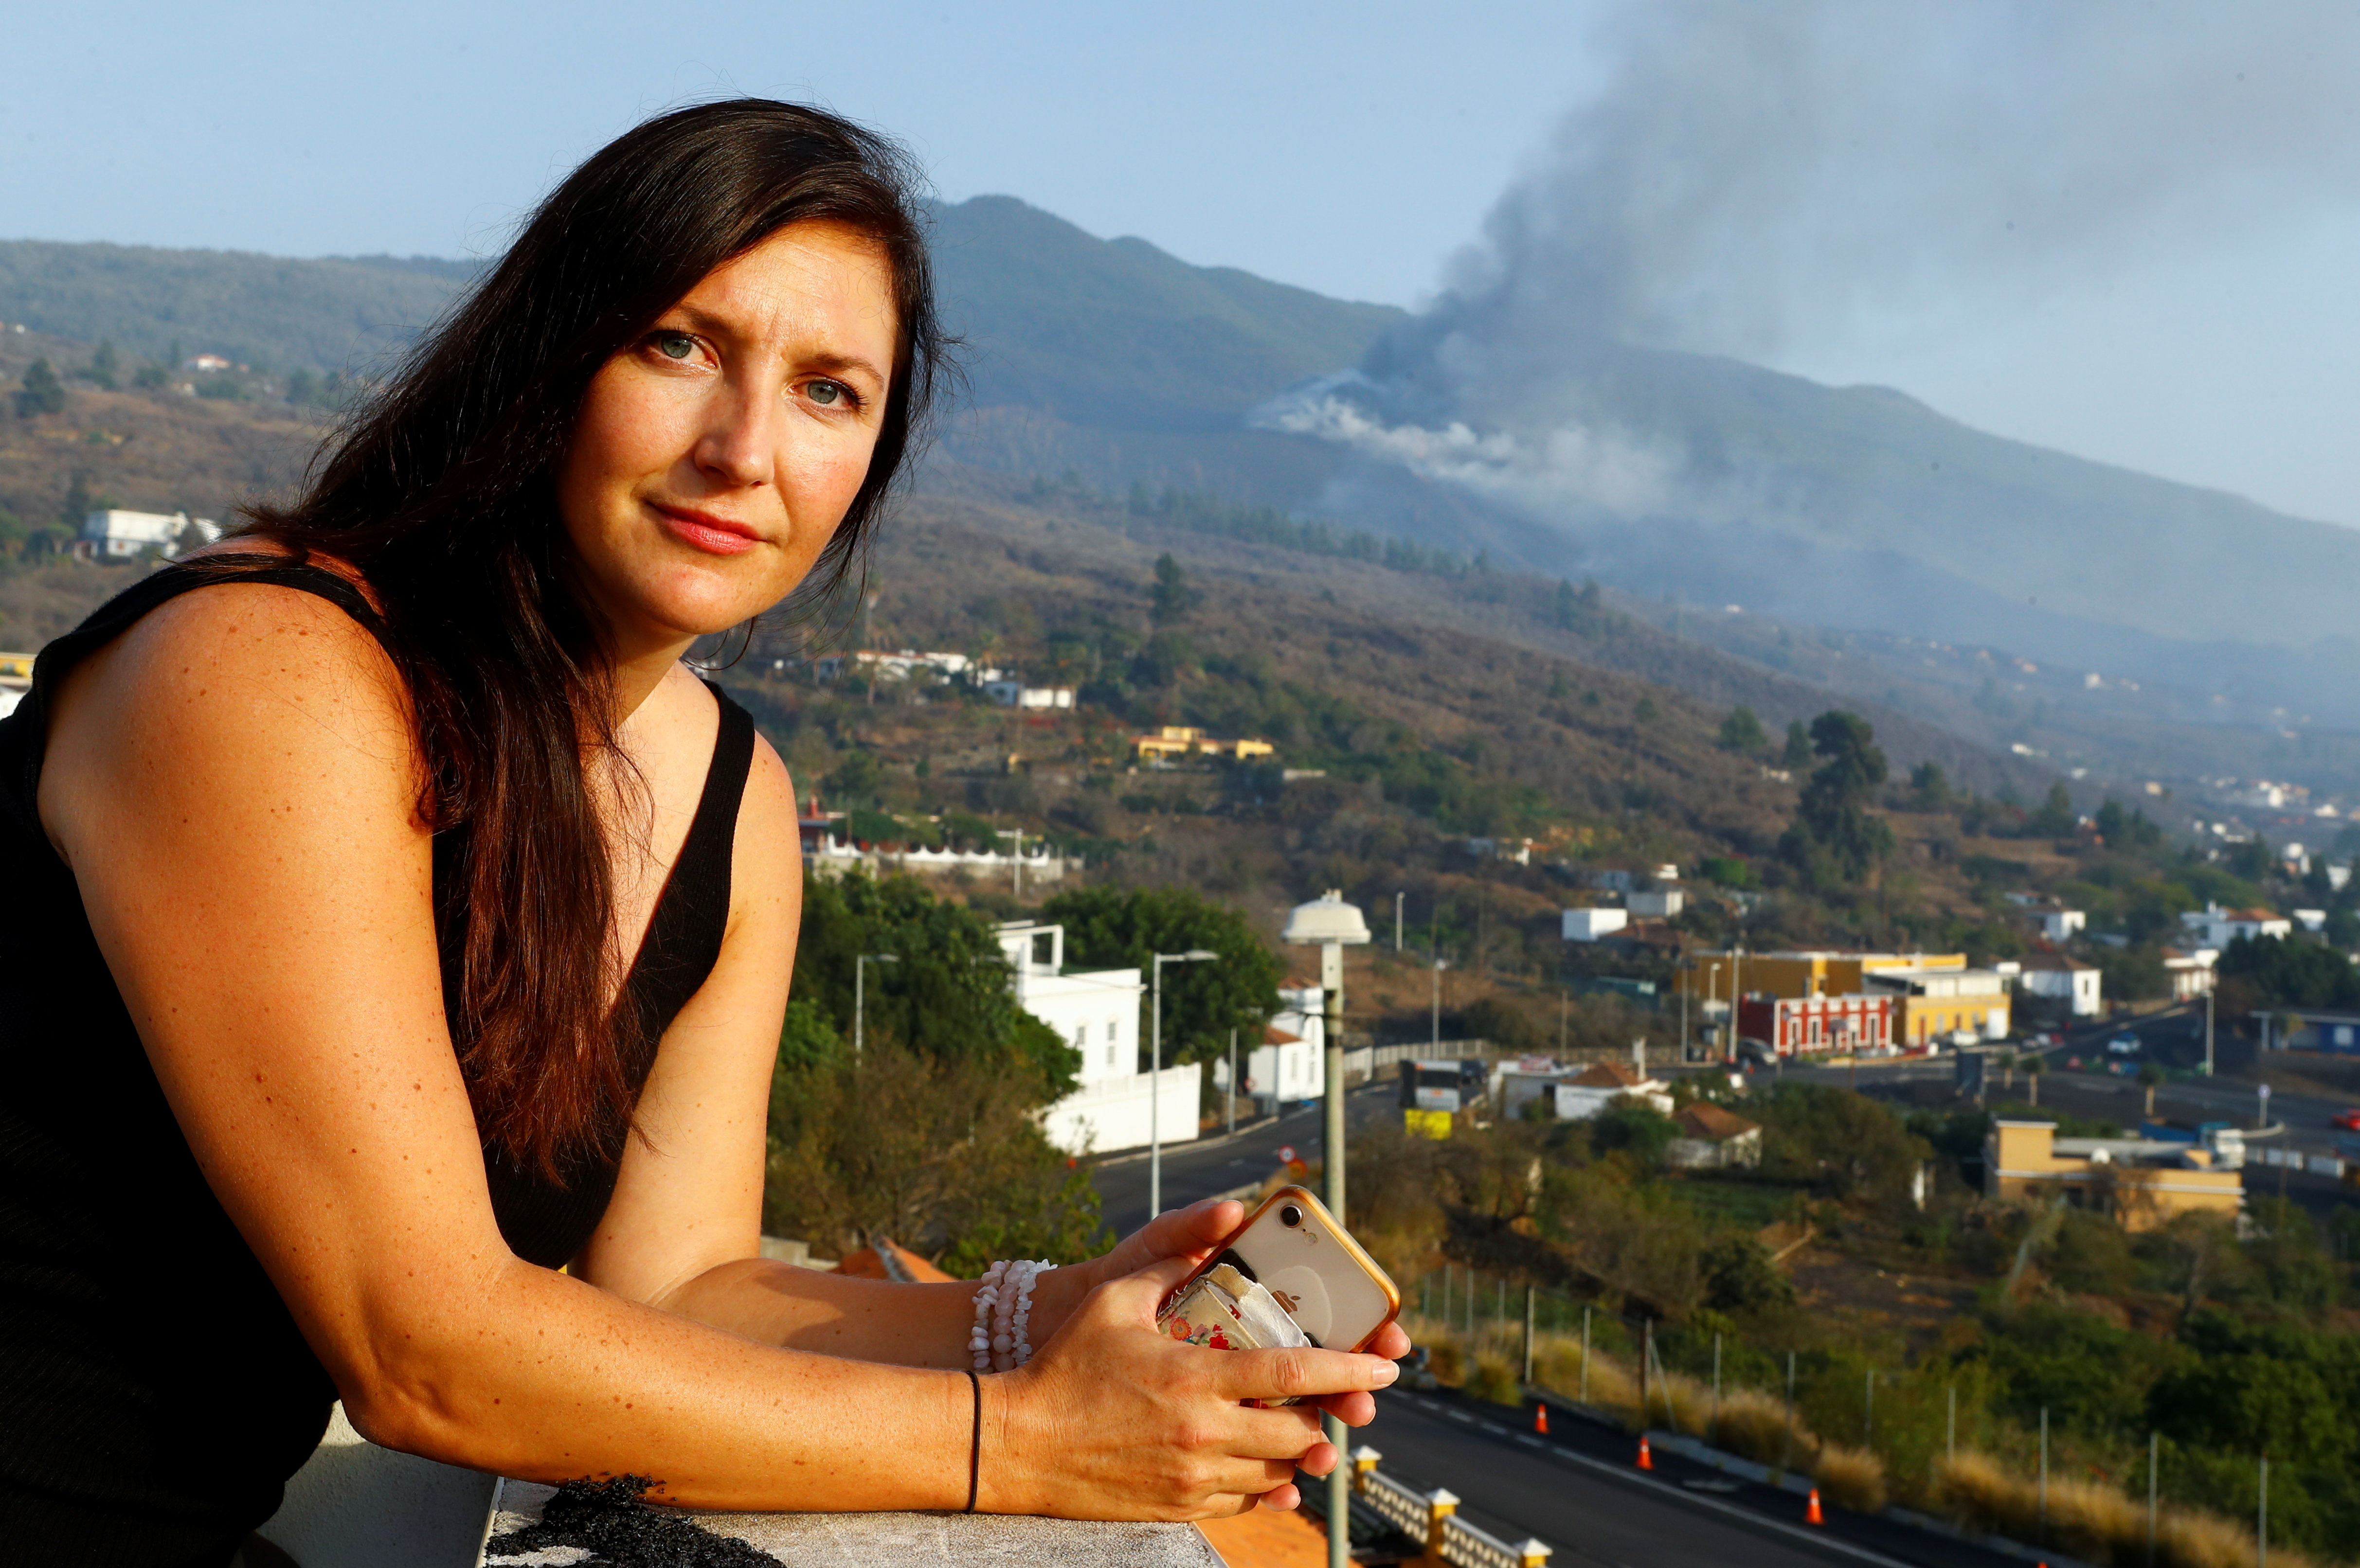 Czech Eva Kubelkova, a volcano fanatic based in the Azores, poses for a picture with the Cumbre Vieja volcano in the background, in El Paso